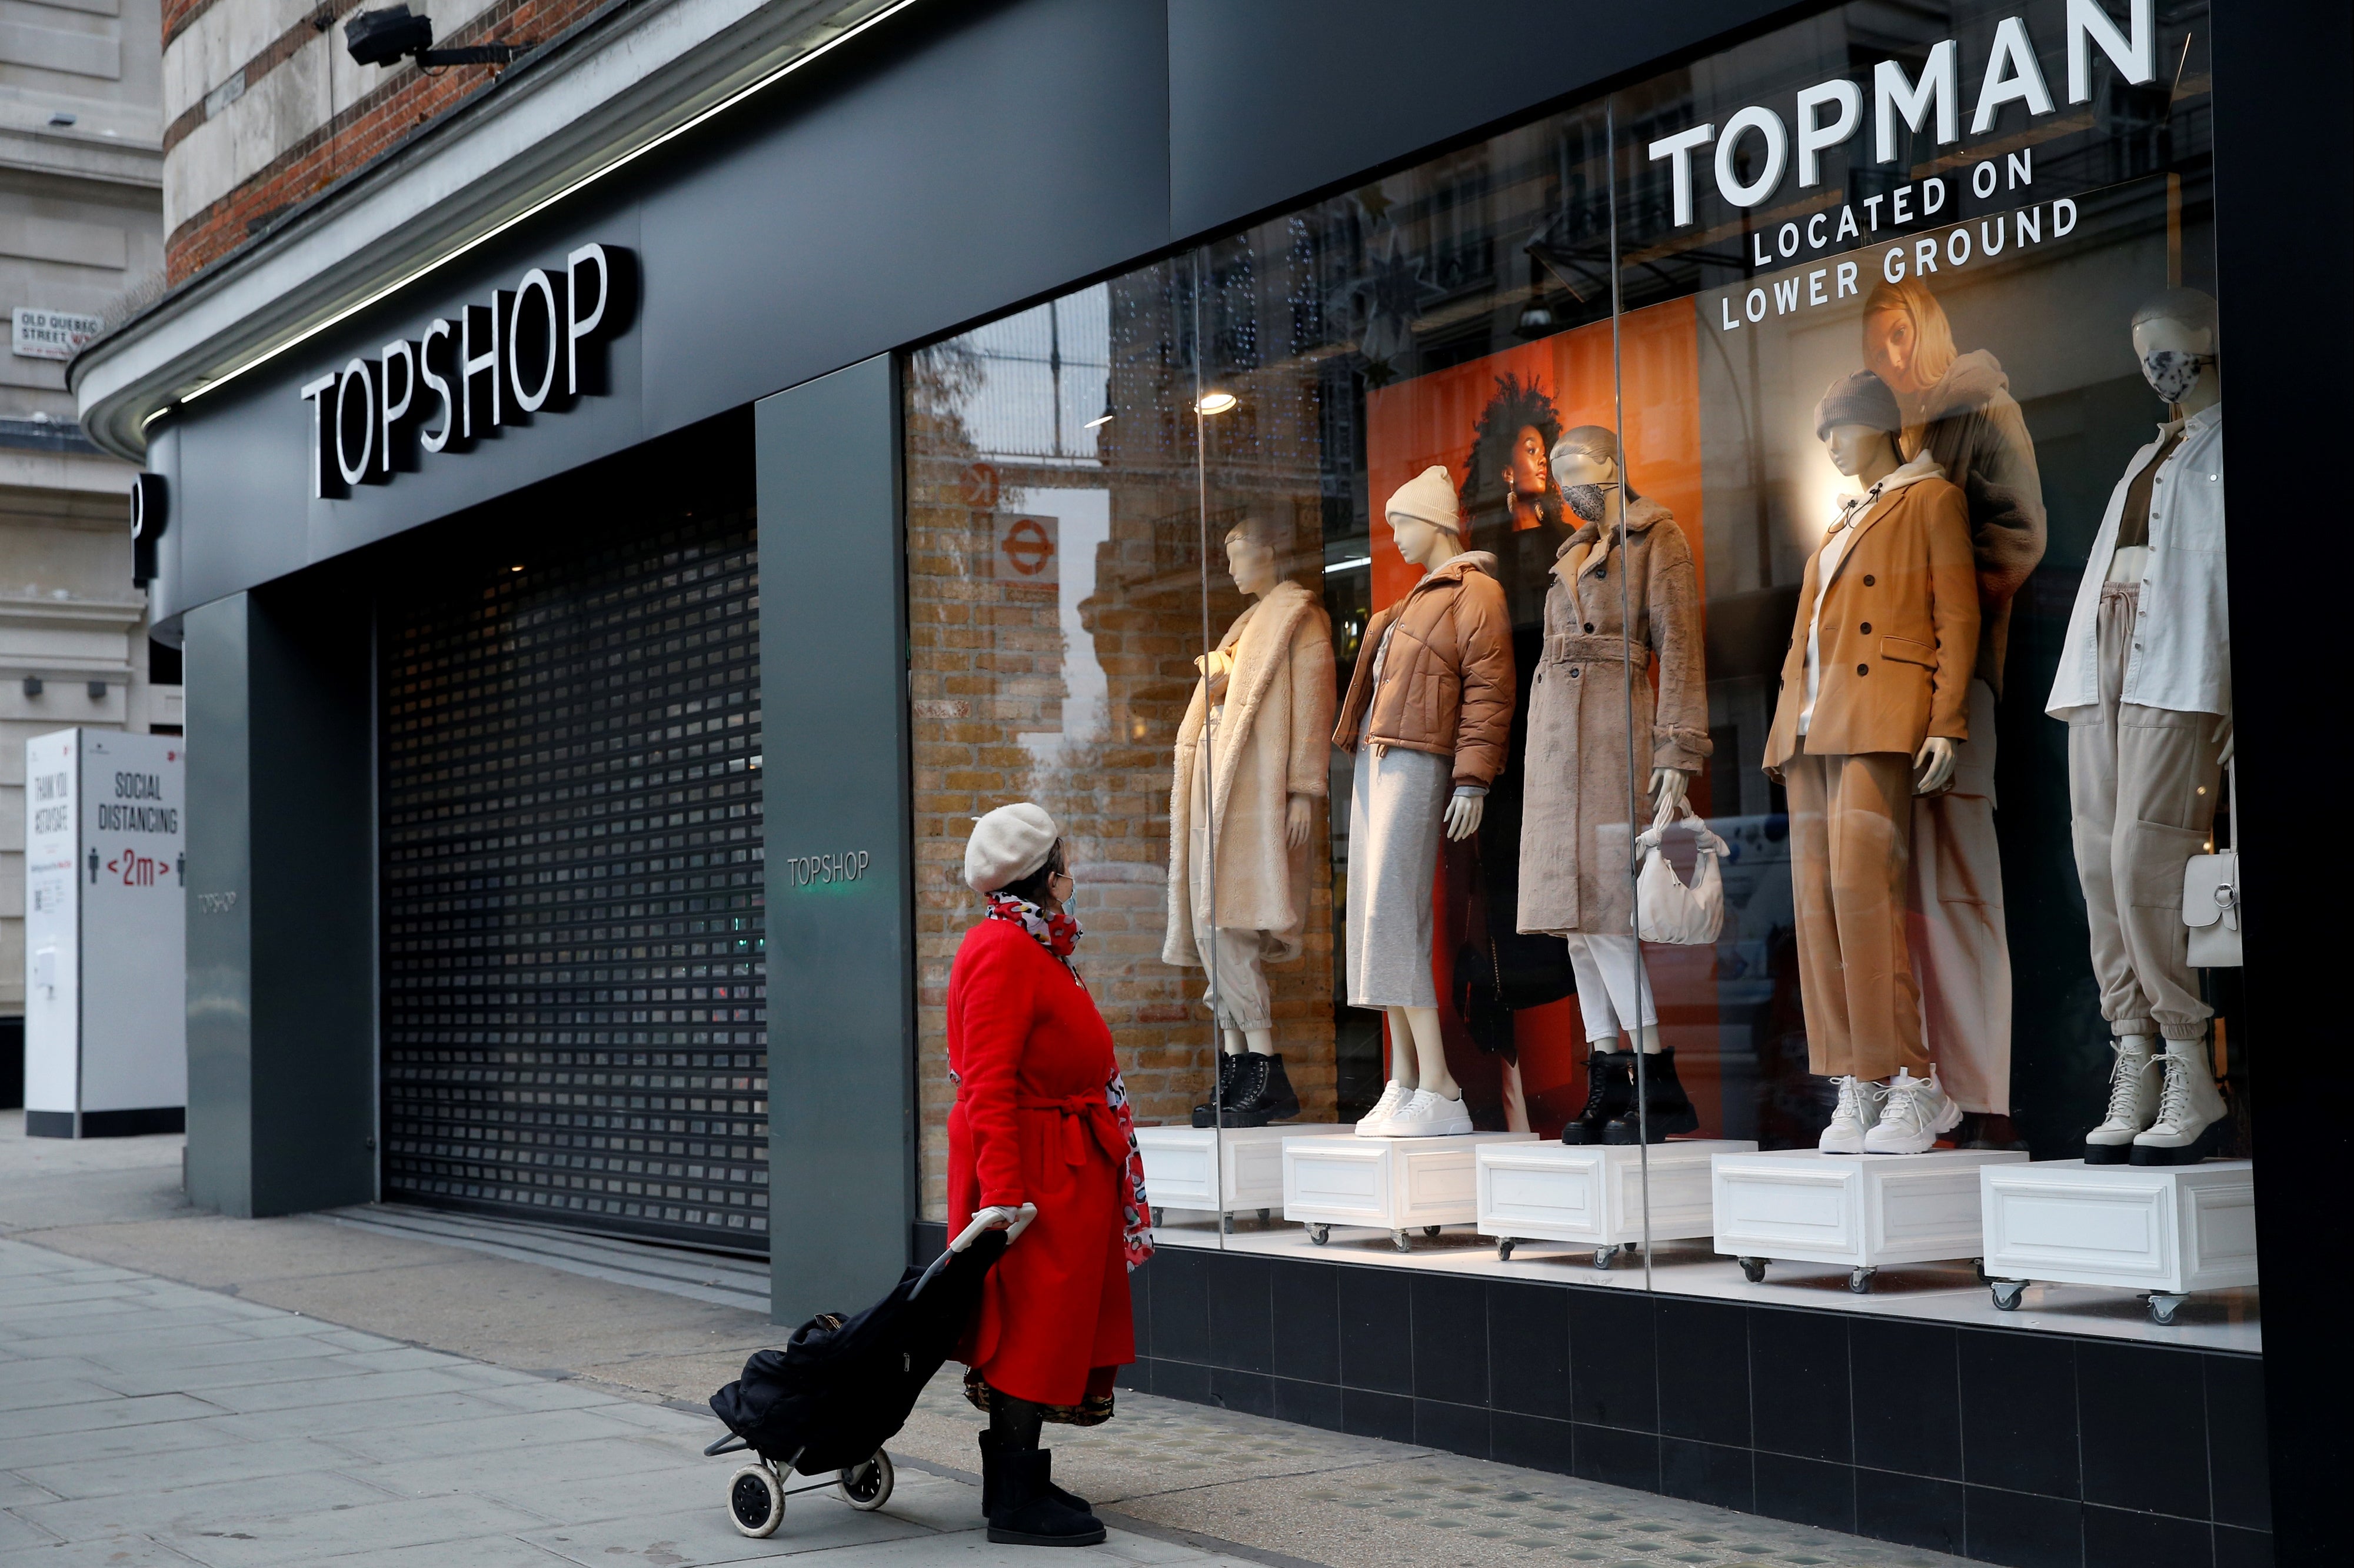 We must not ignore the reasons behind the Topshop owner’s demise